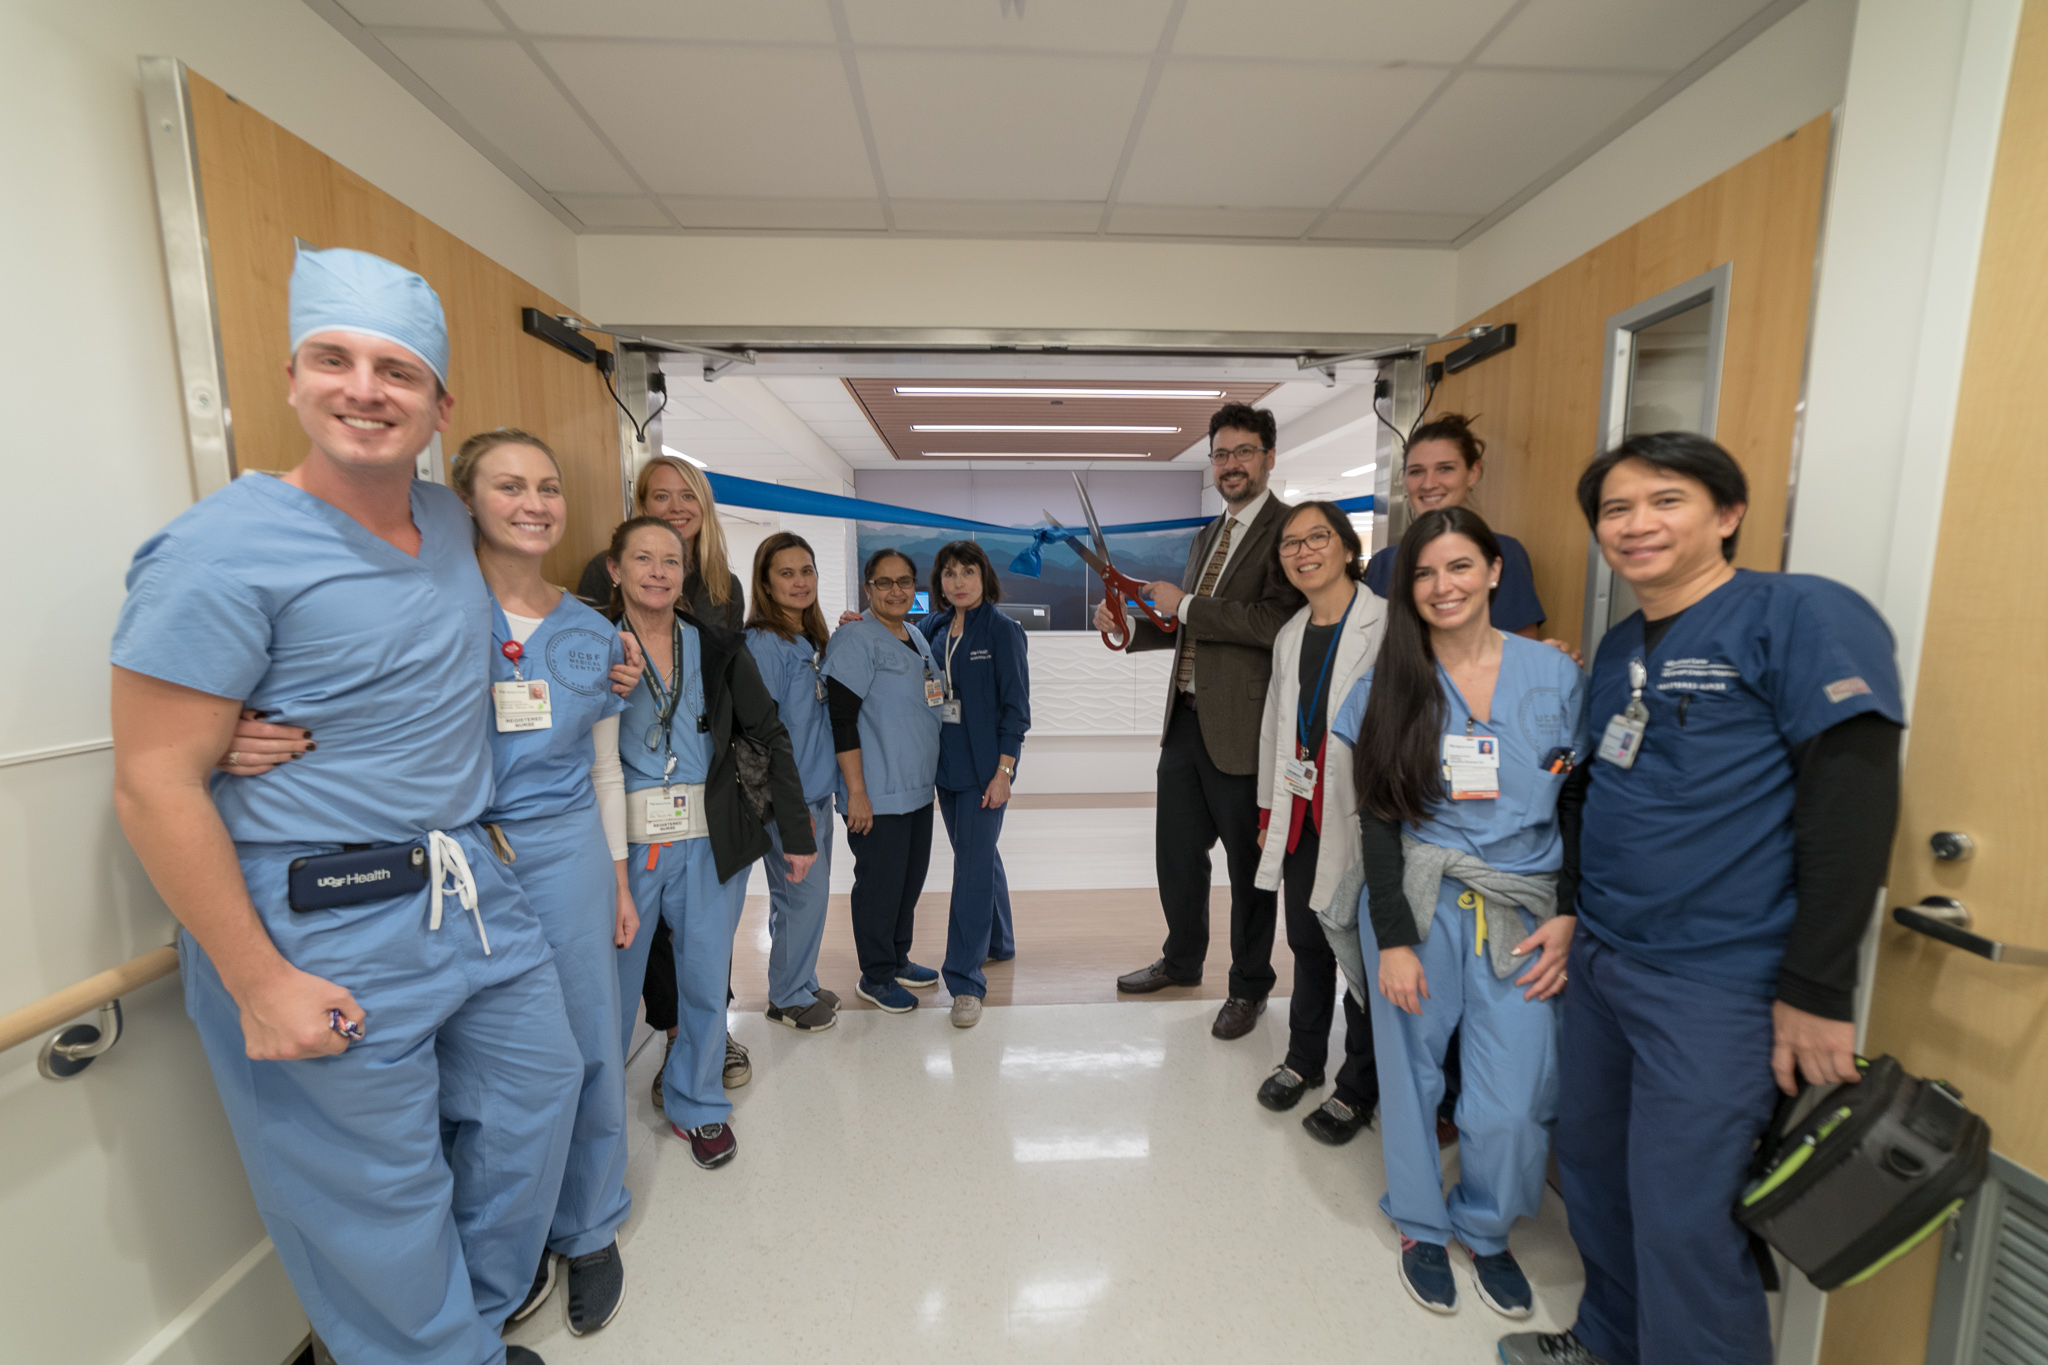 UCSF Radiology Completes Important Facility Expansion UCSF Radiology